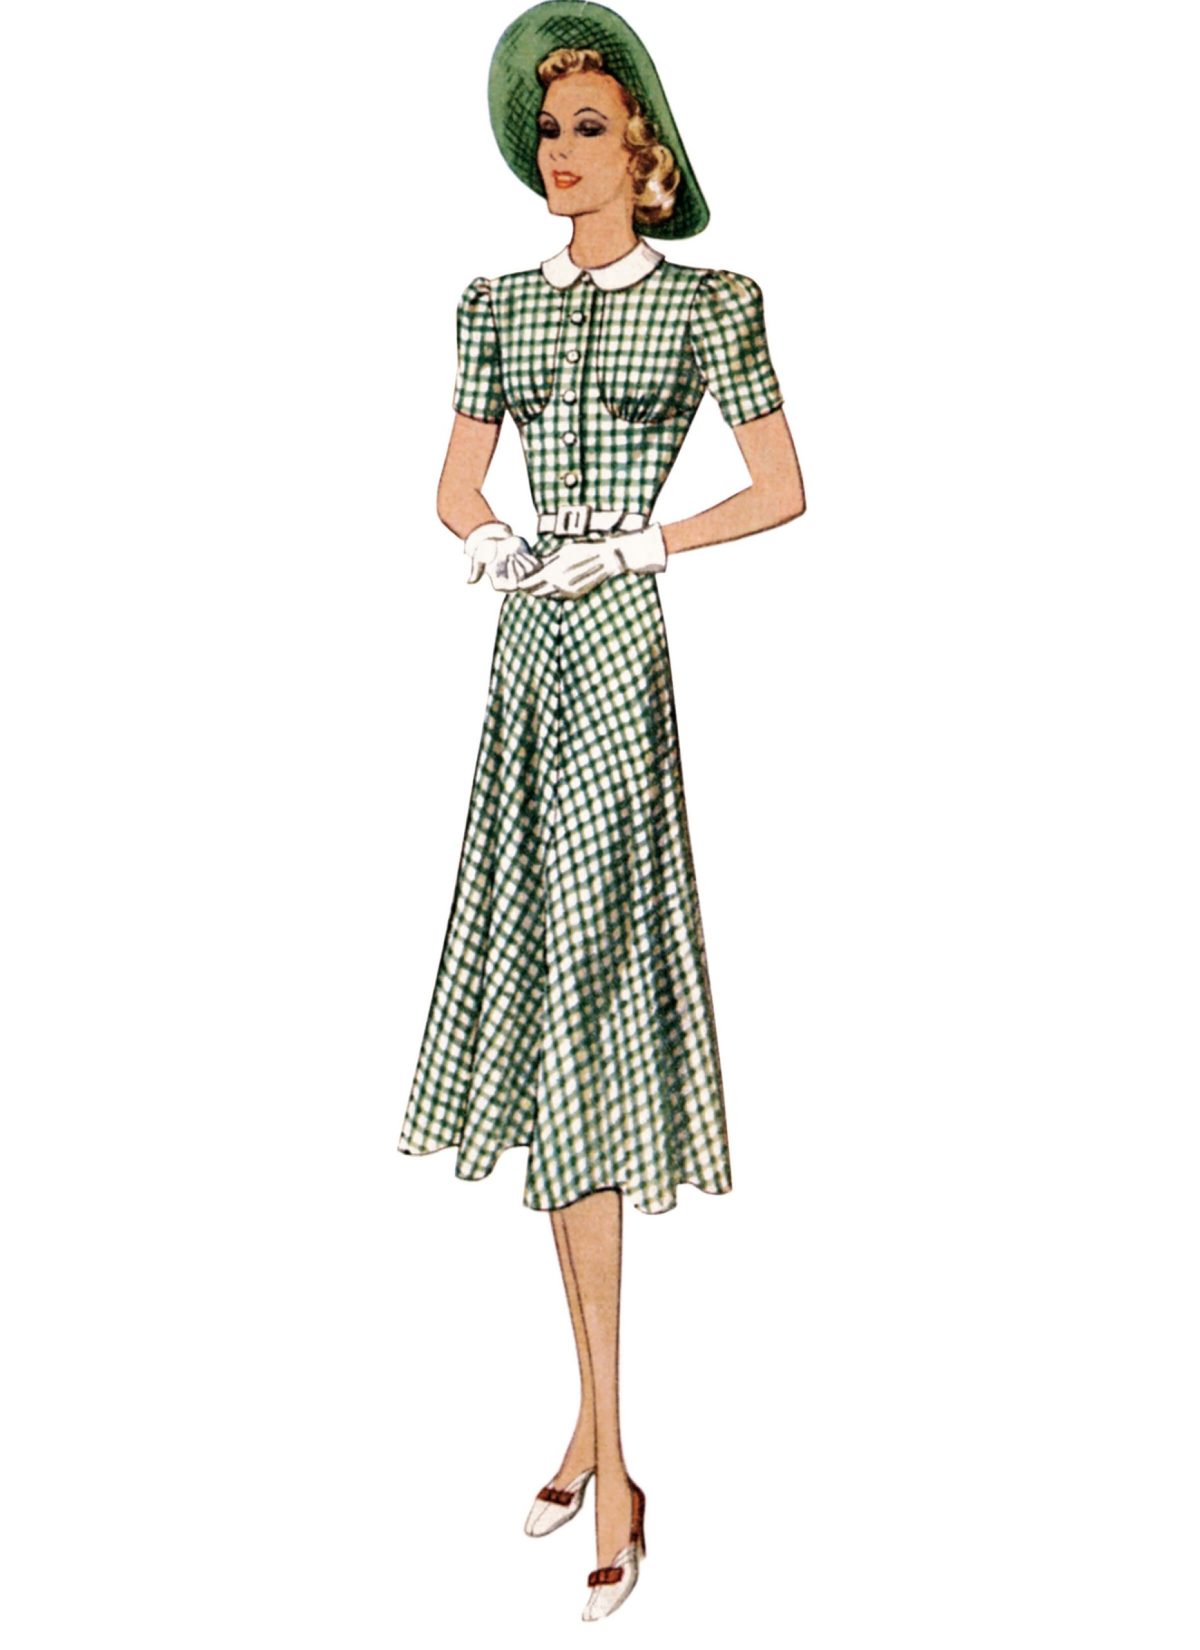 McCall's Sewing Pattern M8338 Misses' Vintage Dresses and Belt